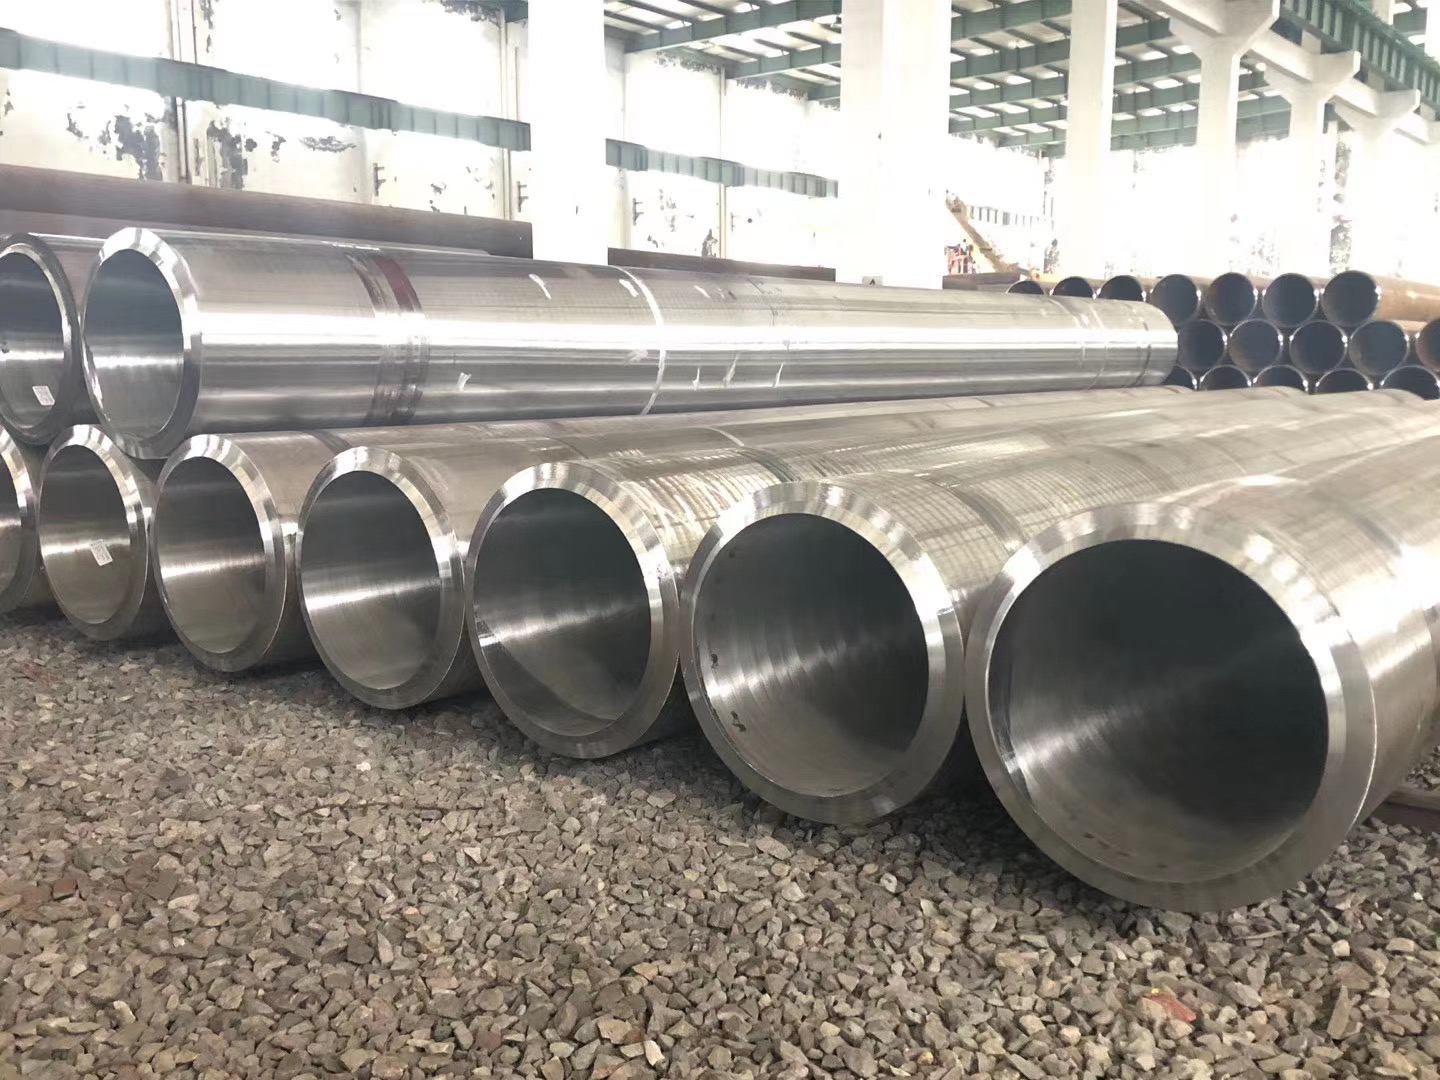 Welcome to visit our company——SANONPIPE